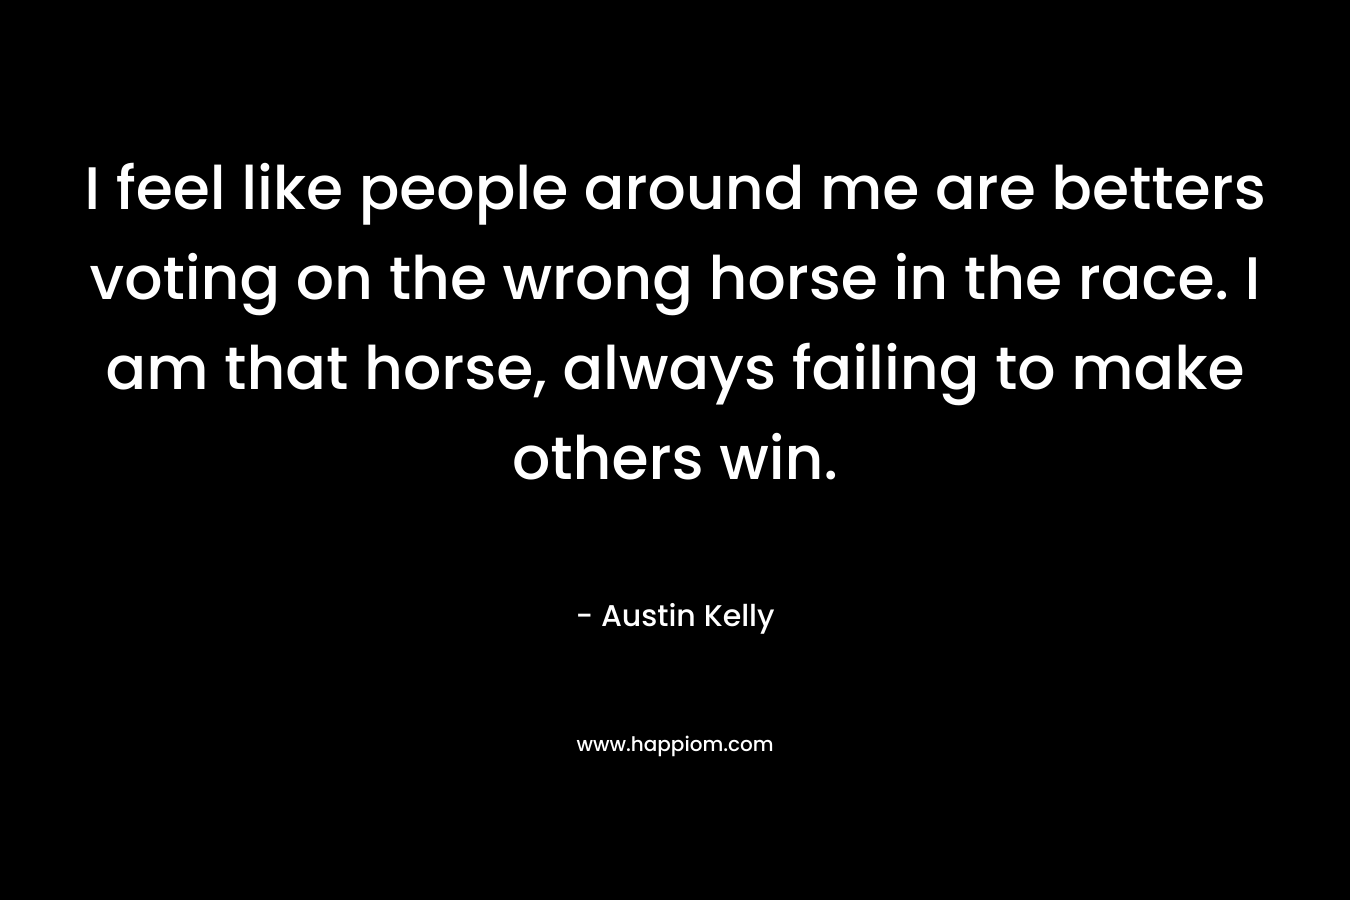 I feel like people around me are betters voting on the wrong horse in the race. I am that horse, always failing to make others win. – Austin Kelly